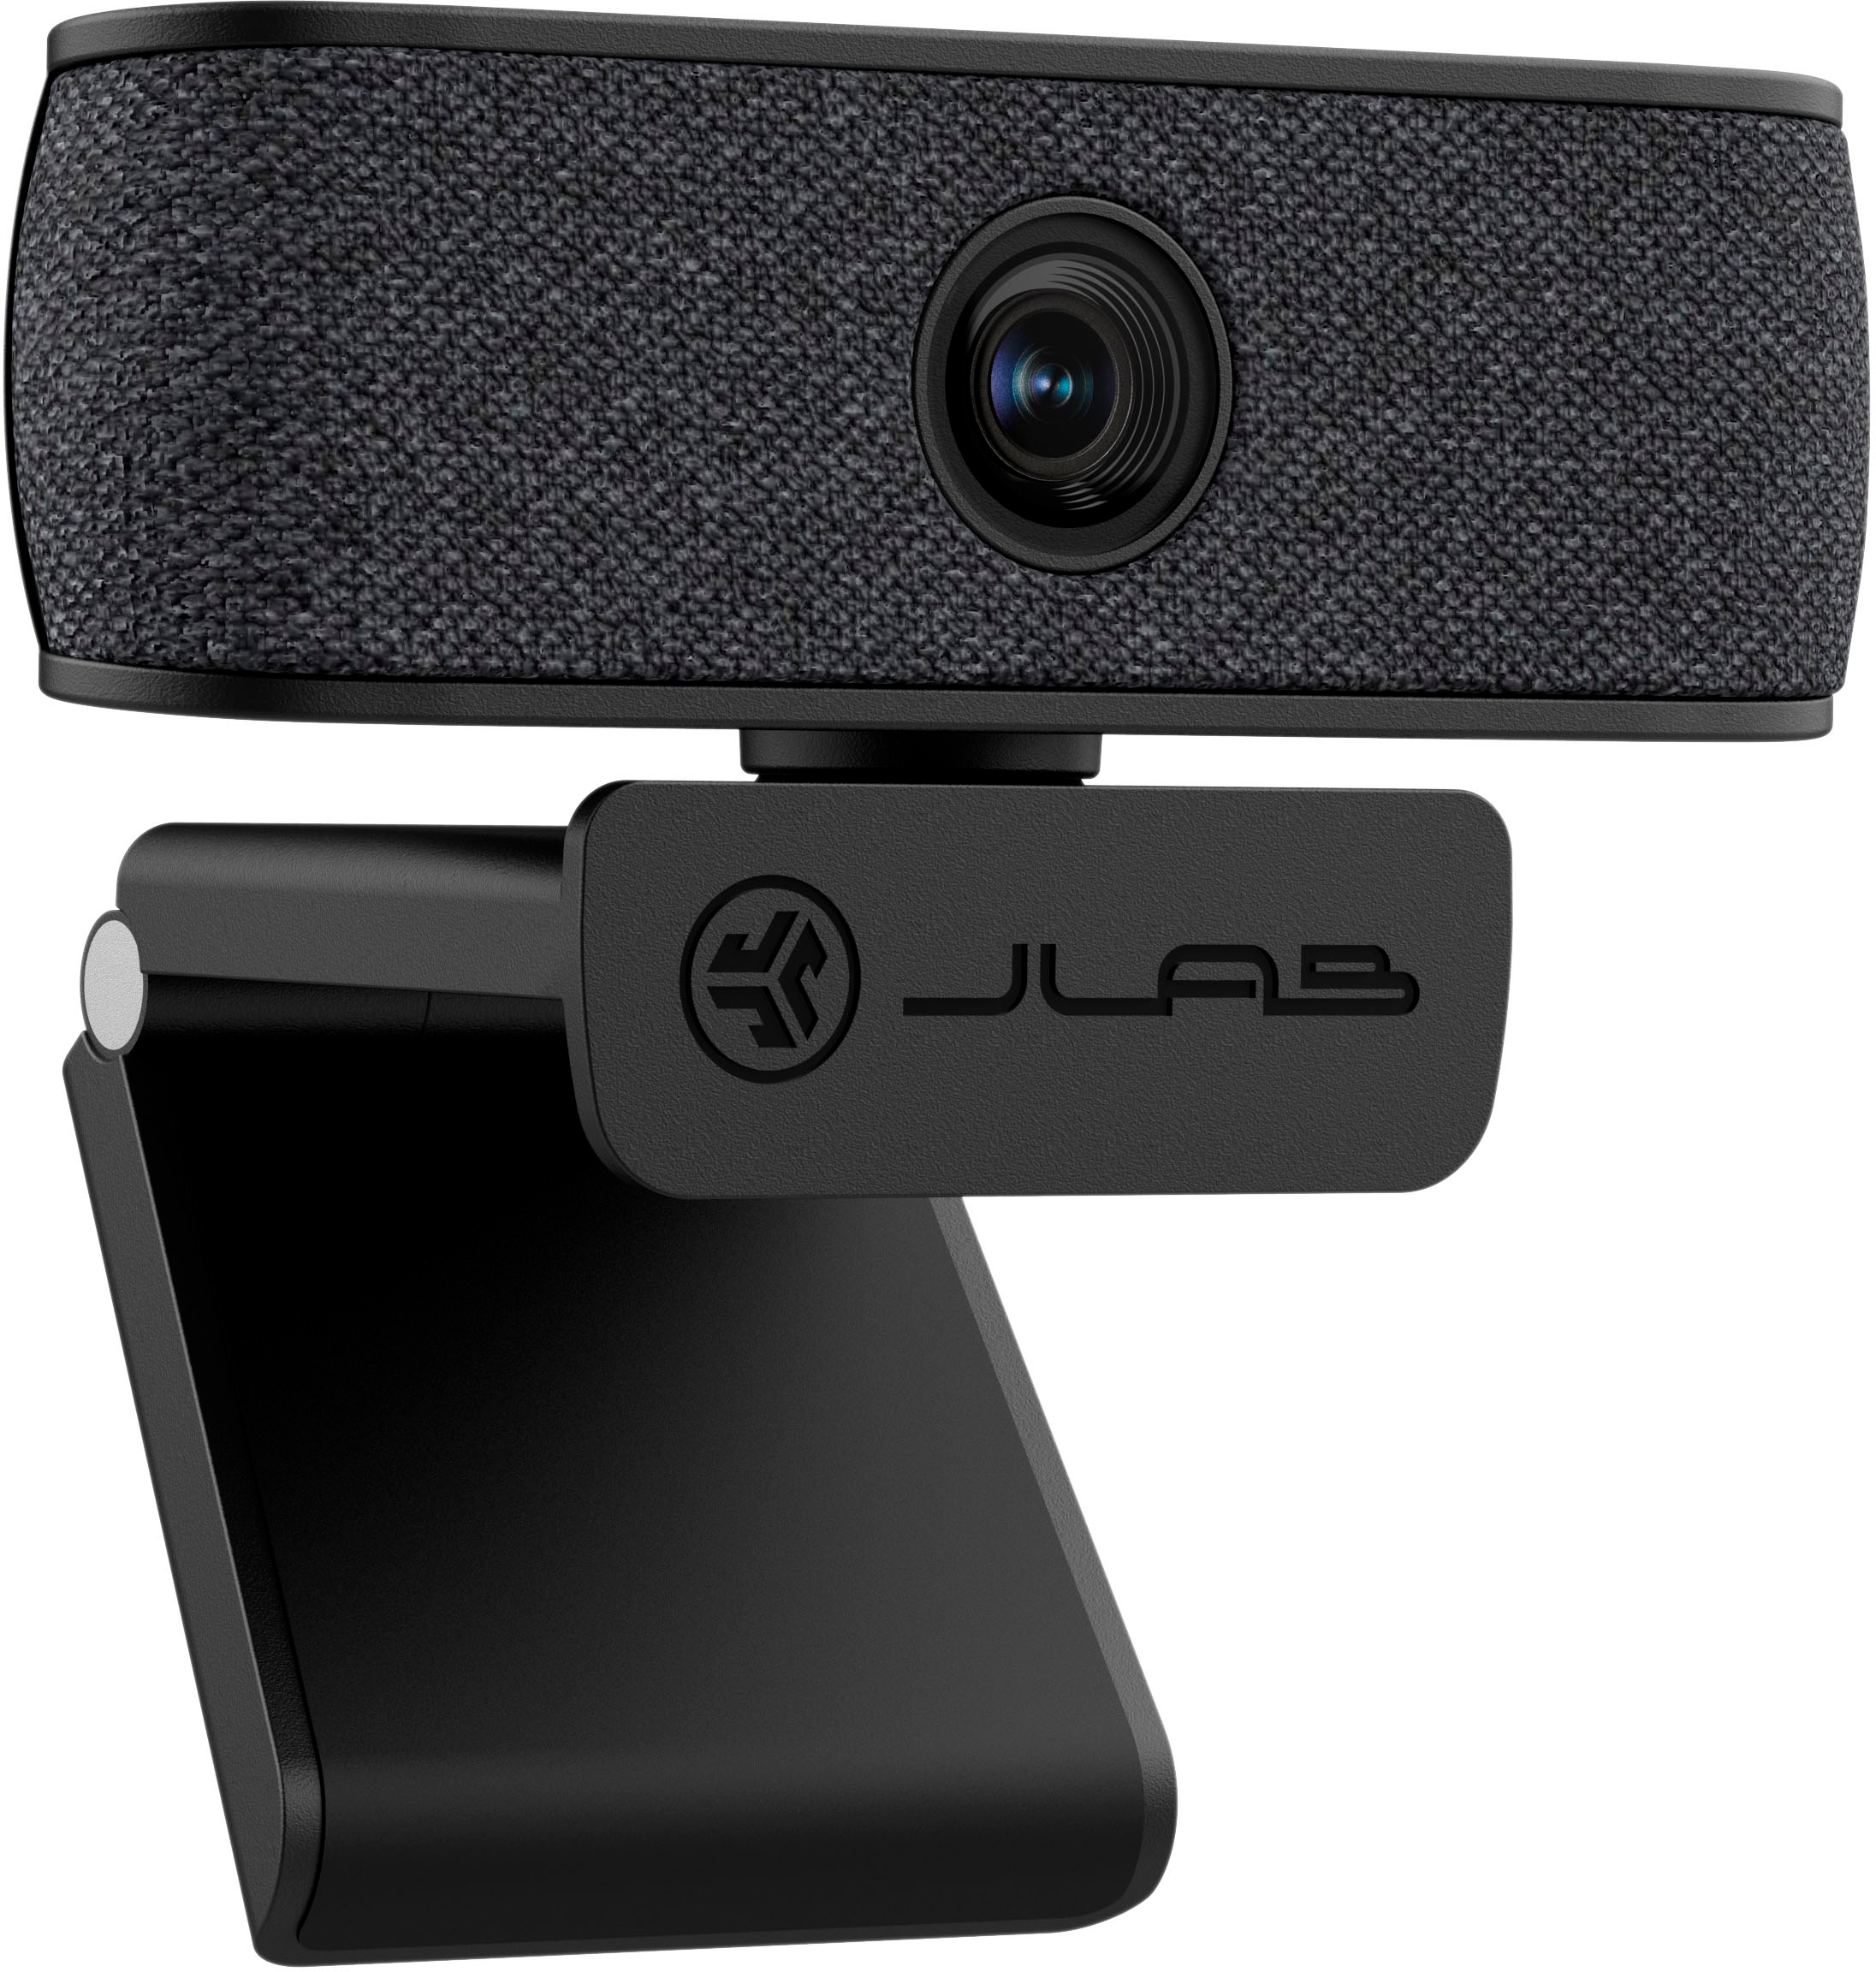 HD Webcam with Auto & Manual Focus Switch – j5create